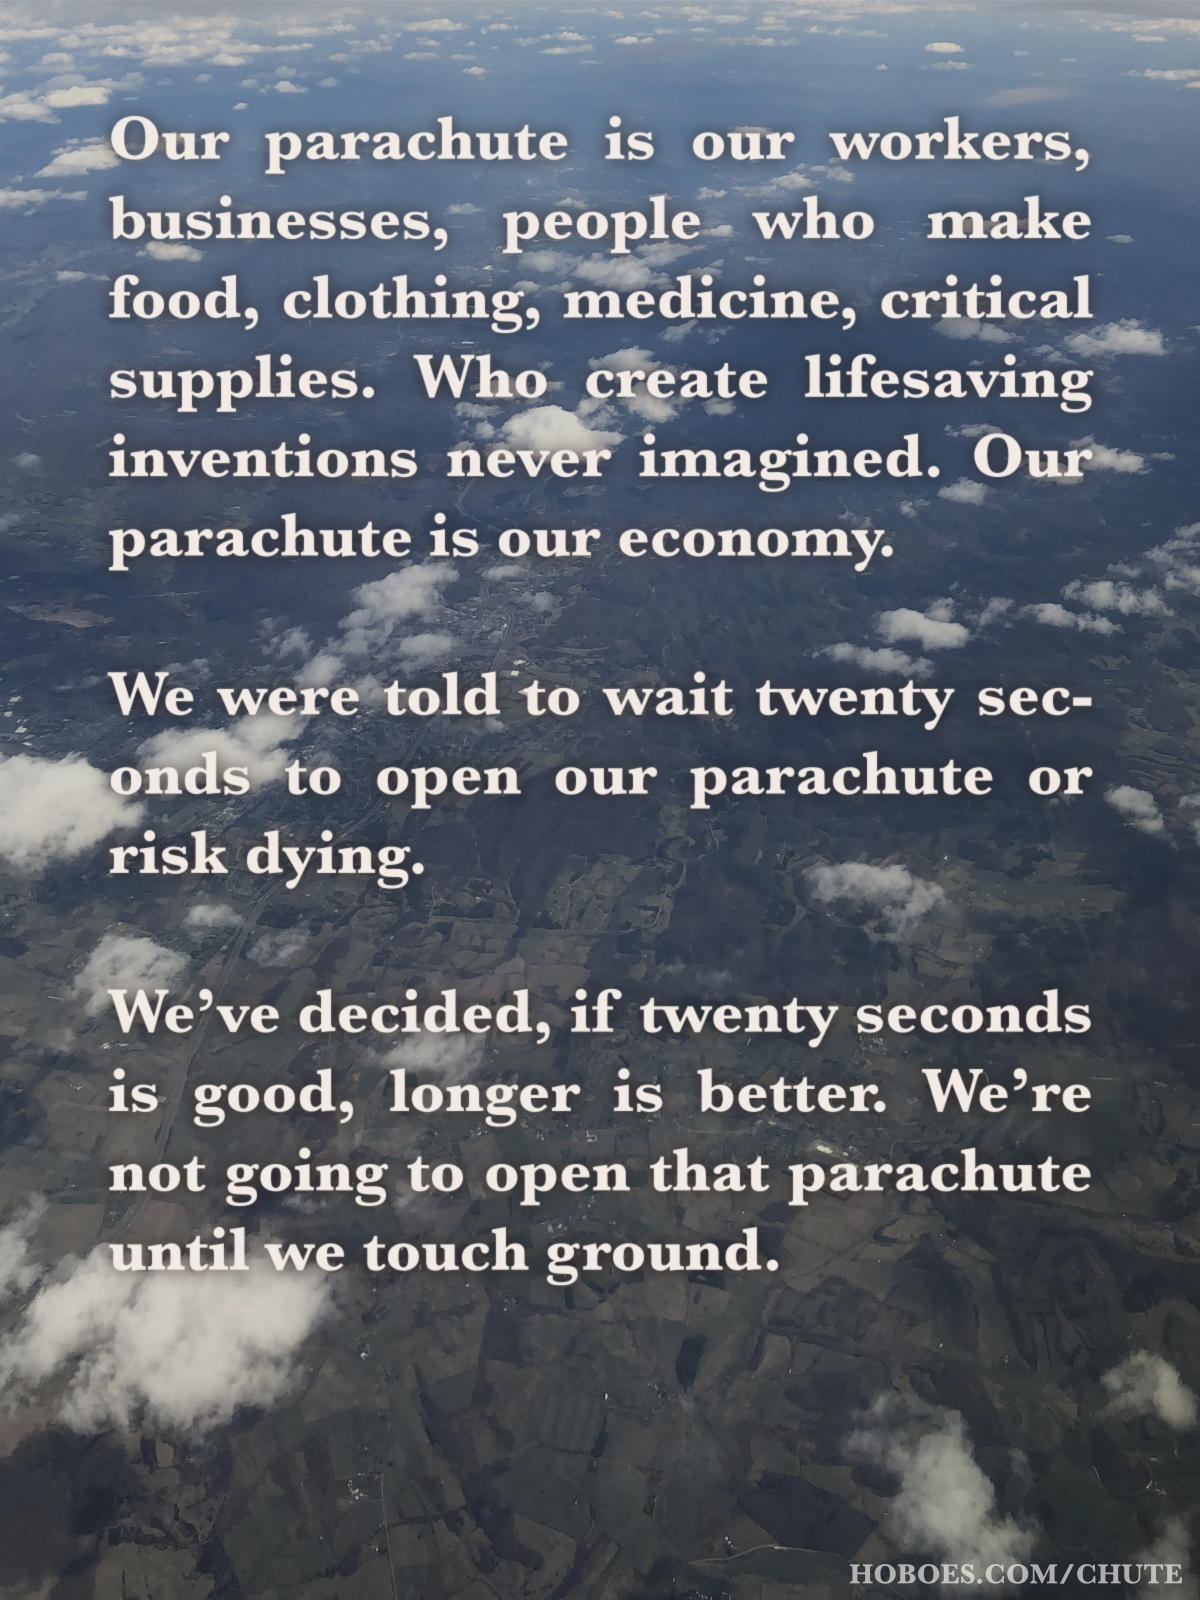 Our parachute is our economy: Our parachute is our workers, businesses, people who make food, clothing, medicine, critical supplies. Who create lifesaving inventions never imagined. Our parachute is our economy. We were told to wait twenty seconds to open our parachute or risk dying. We’ve decided, if twenty seconds is good, longer is better. We’re not going to open that parachute until we touch ground.; economics; COVID-19; Coronavirus, Chinese virus, Wuhan virus, WuFlu